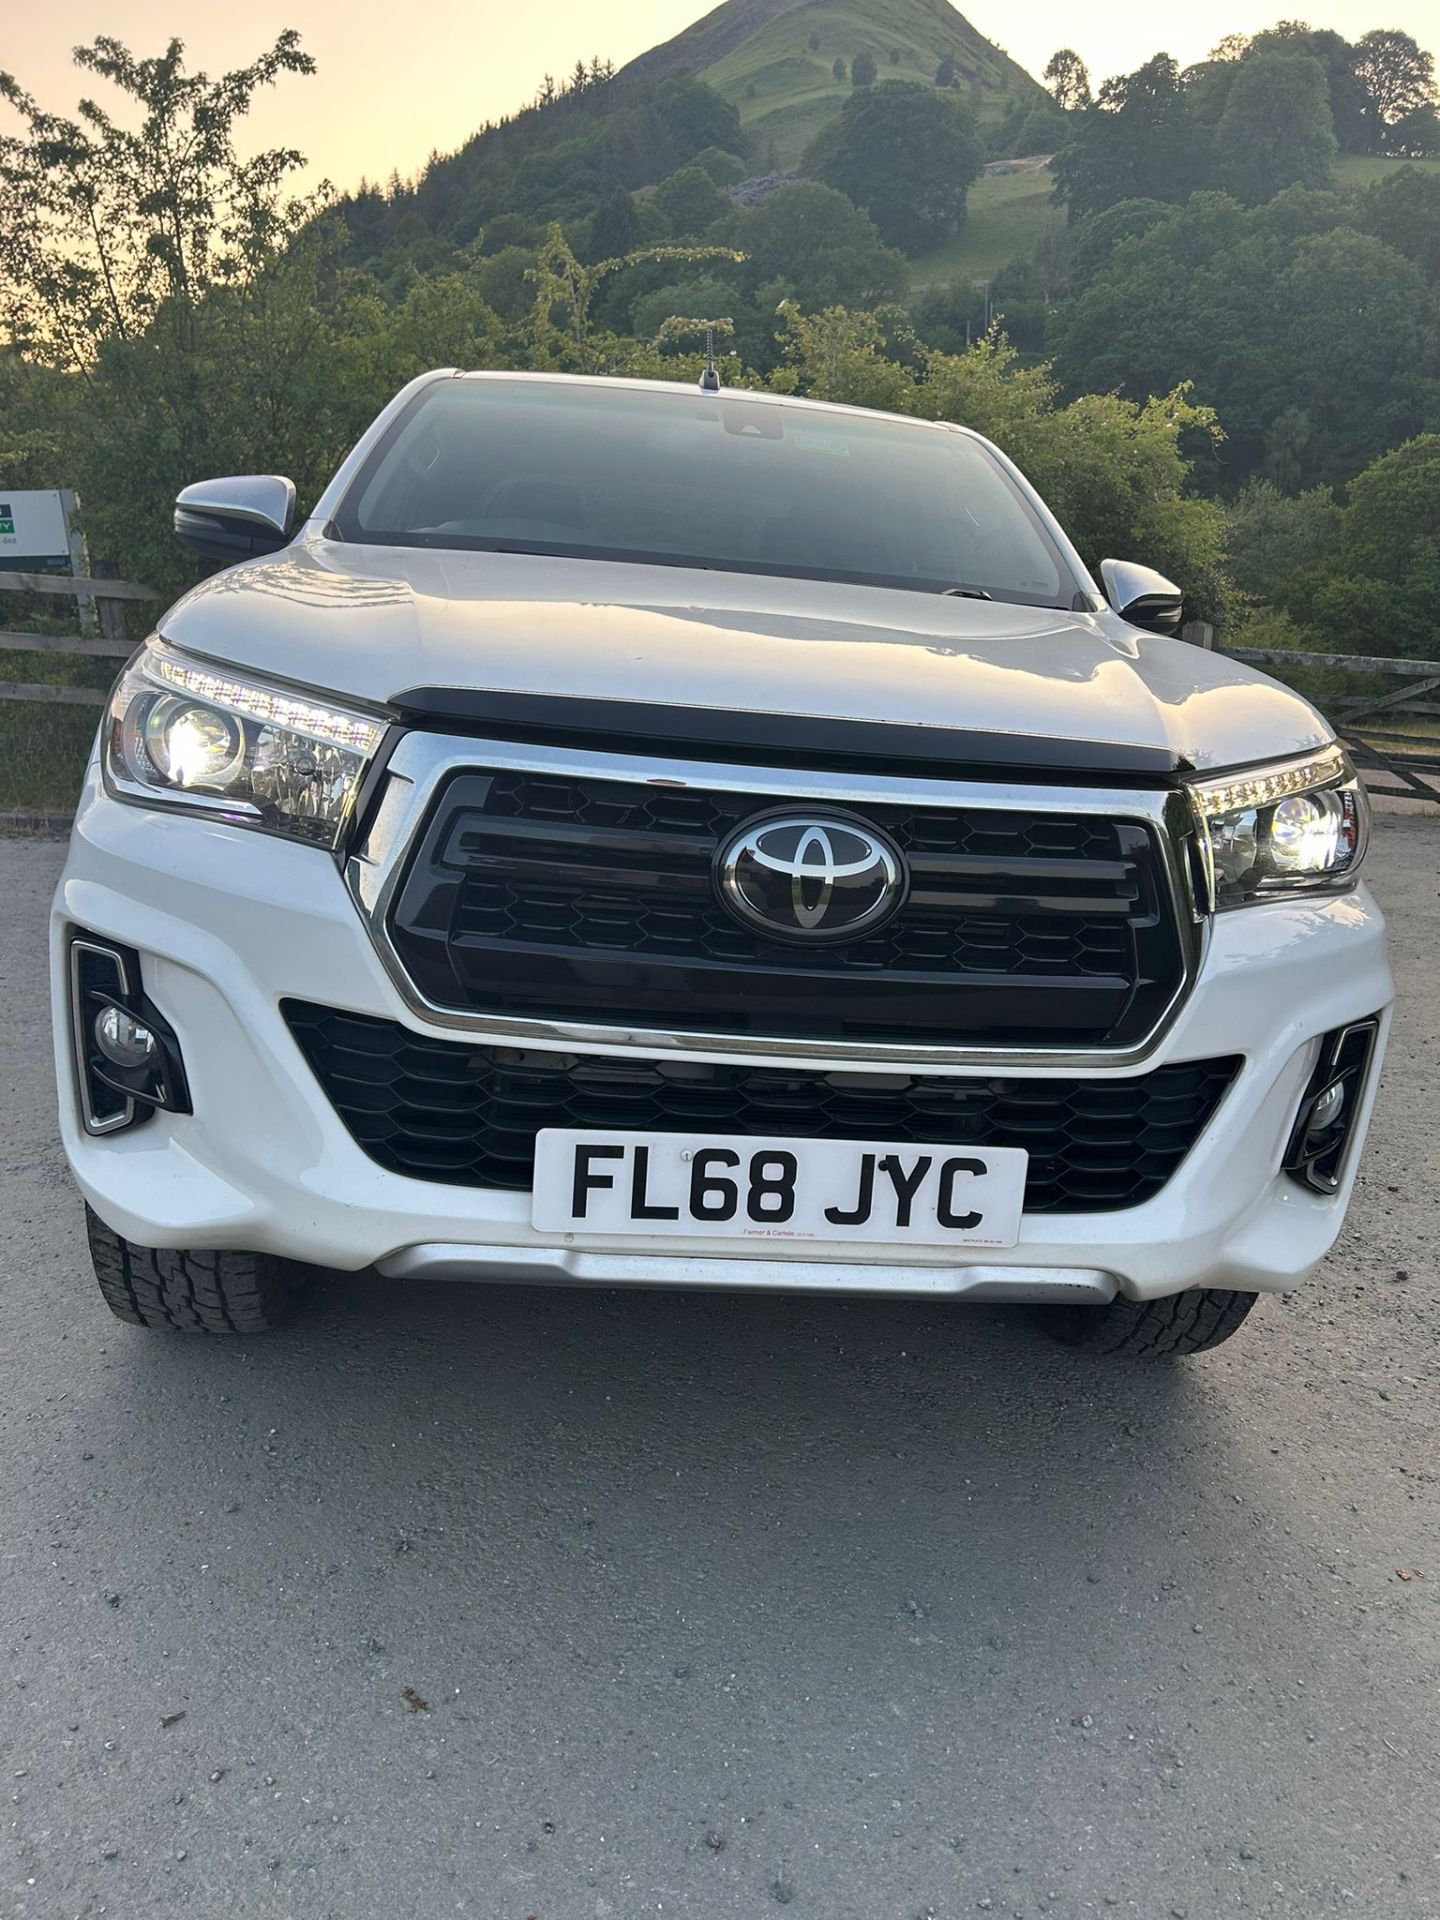 AUTOMATIC 2018 TOYOTA HILUX LIMITED EDITION FACELIFT ROLLER SHUTTER - Image 5 of 18